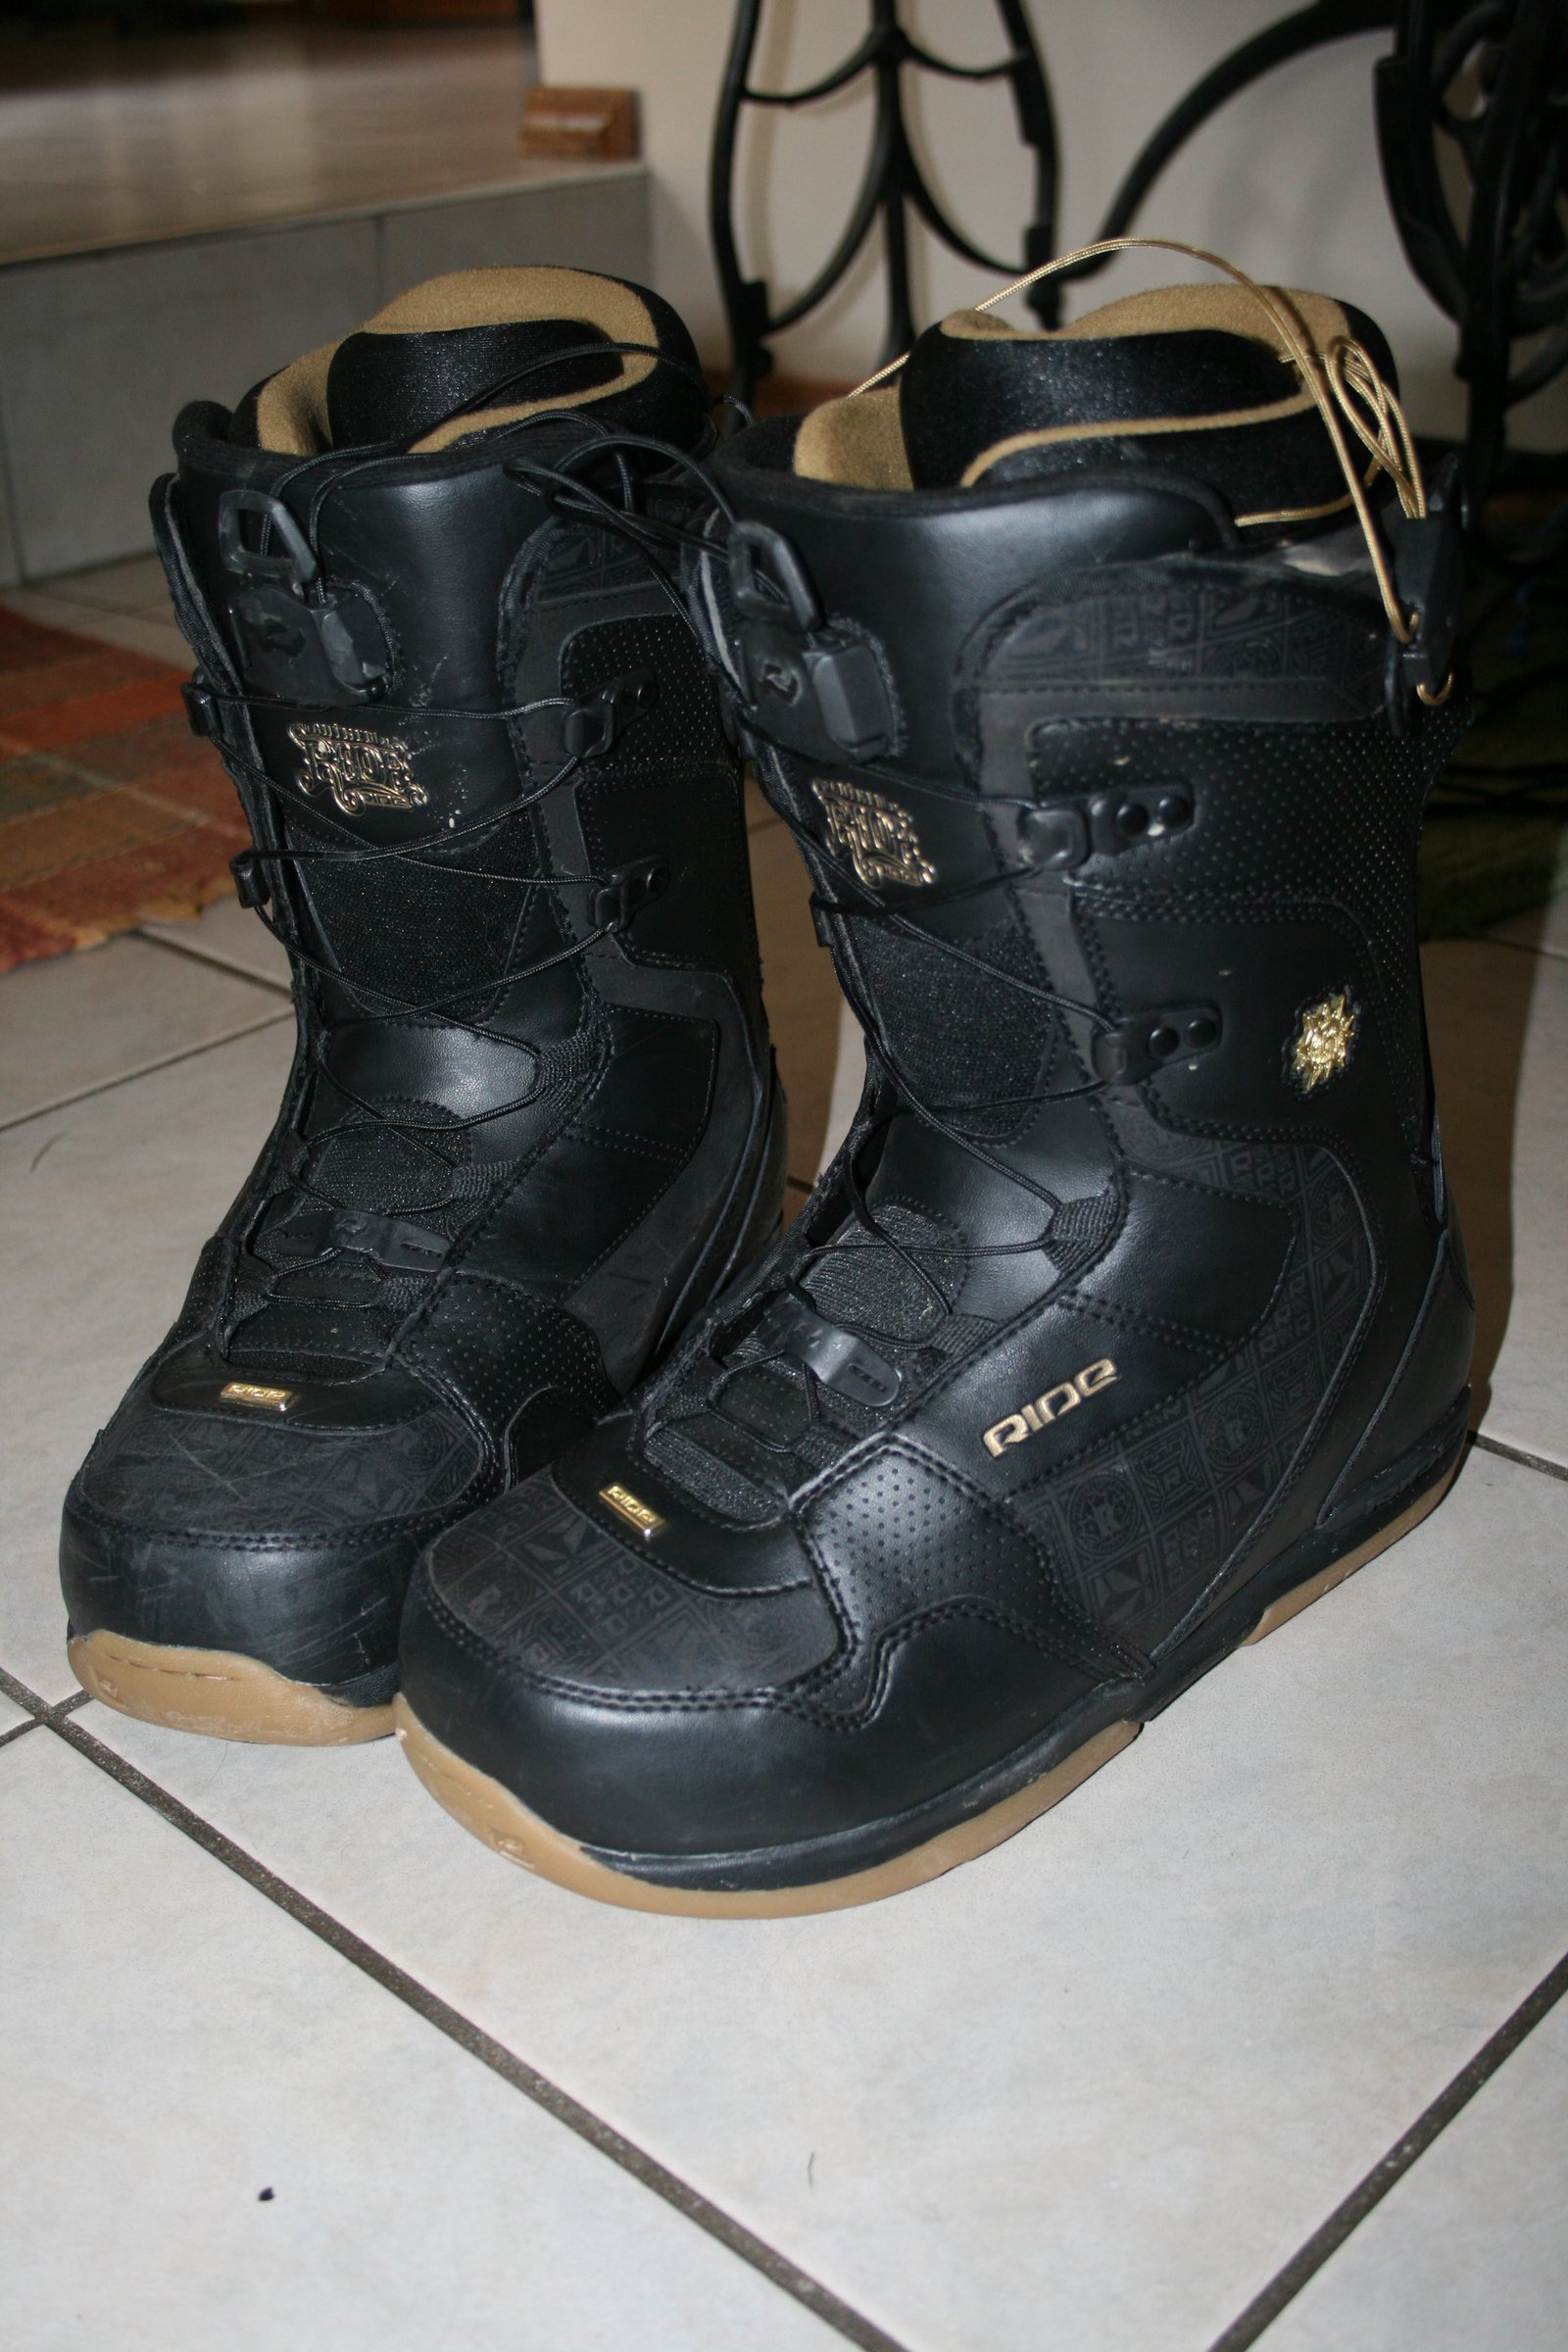 Ride Boots